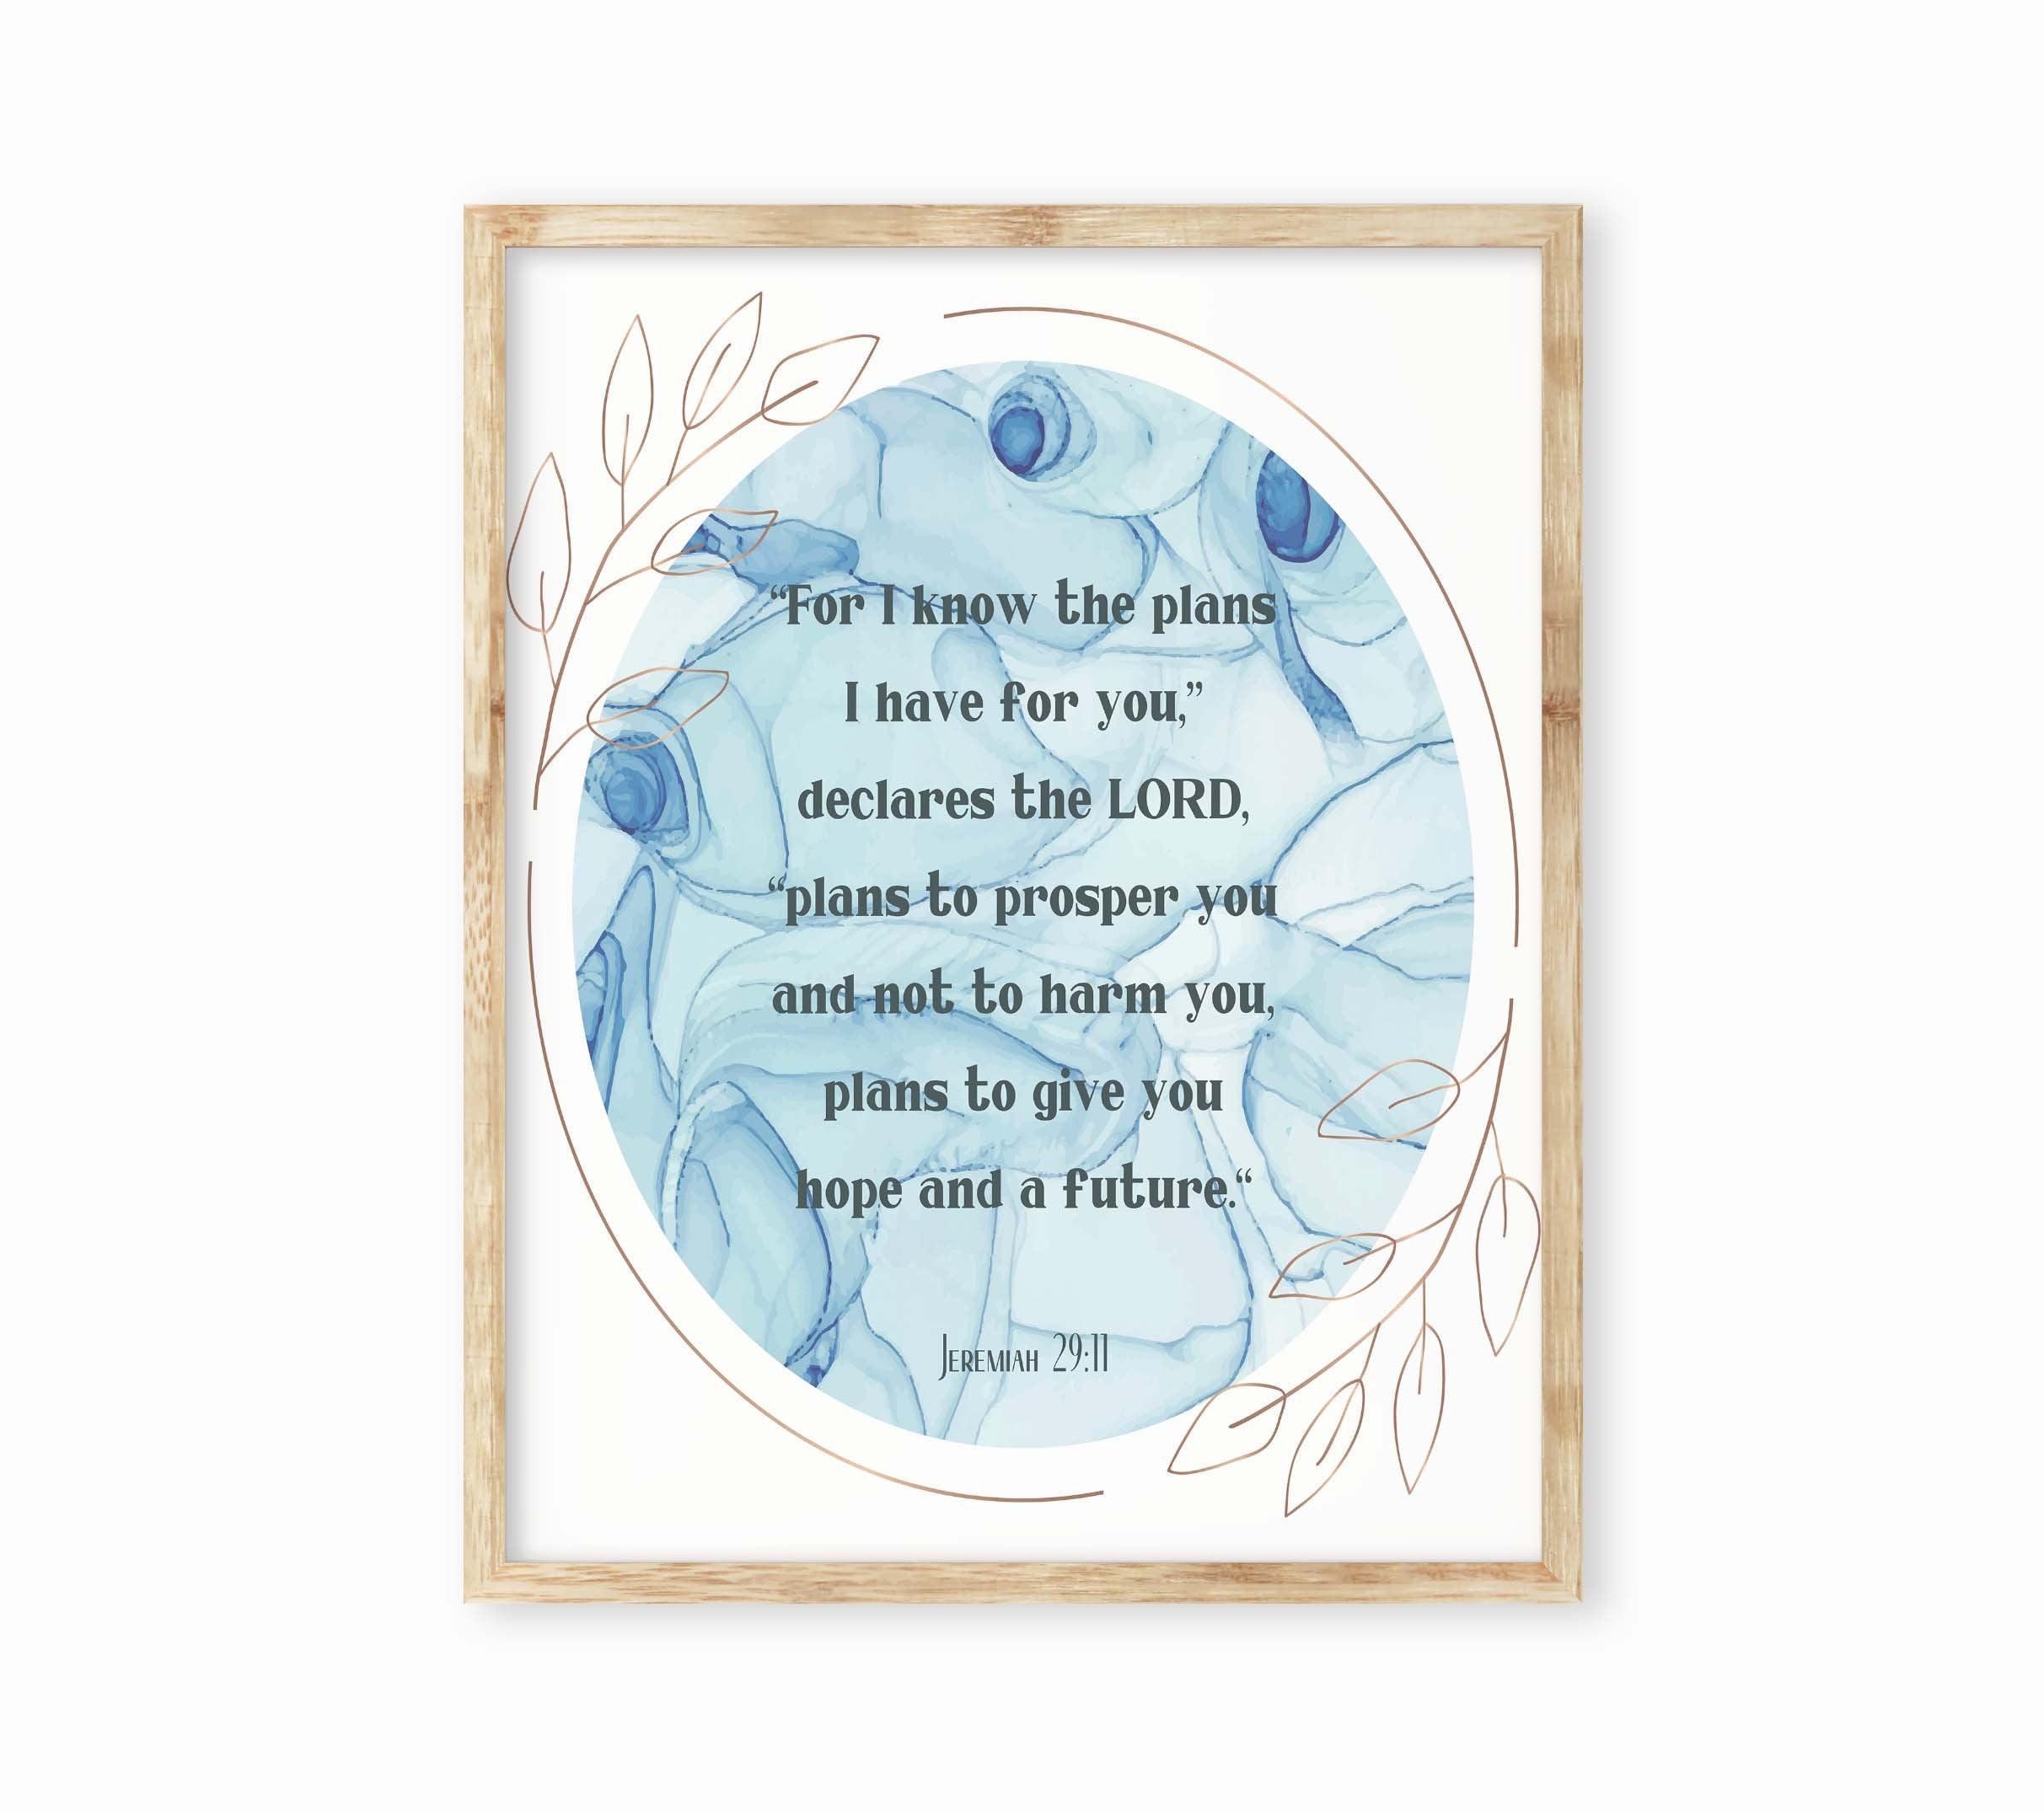 Give you Hope and a Future Jeremiah 29:11 Bible Verse Print